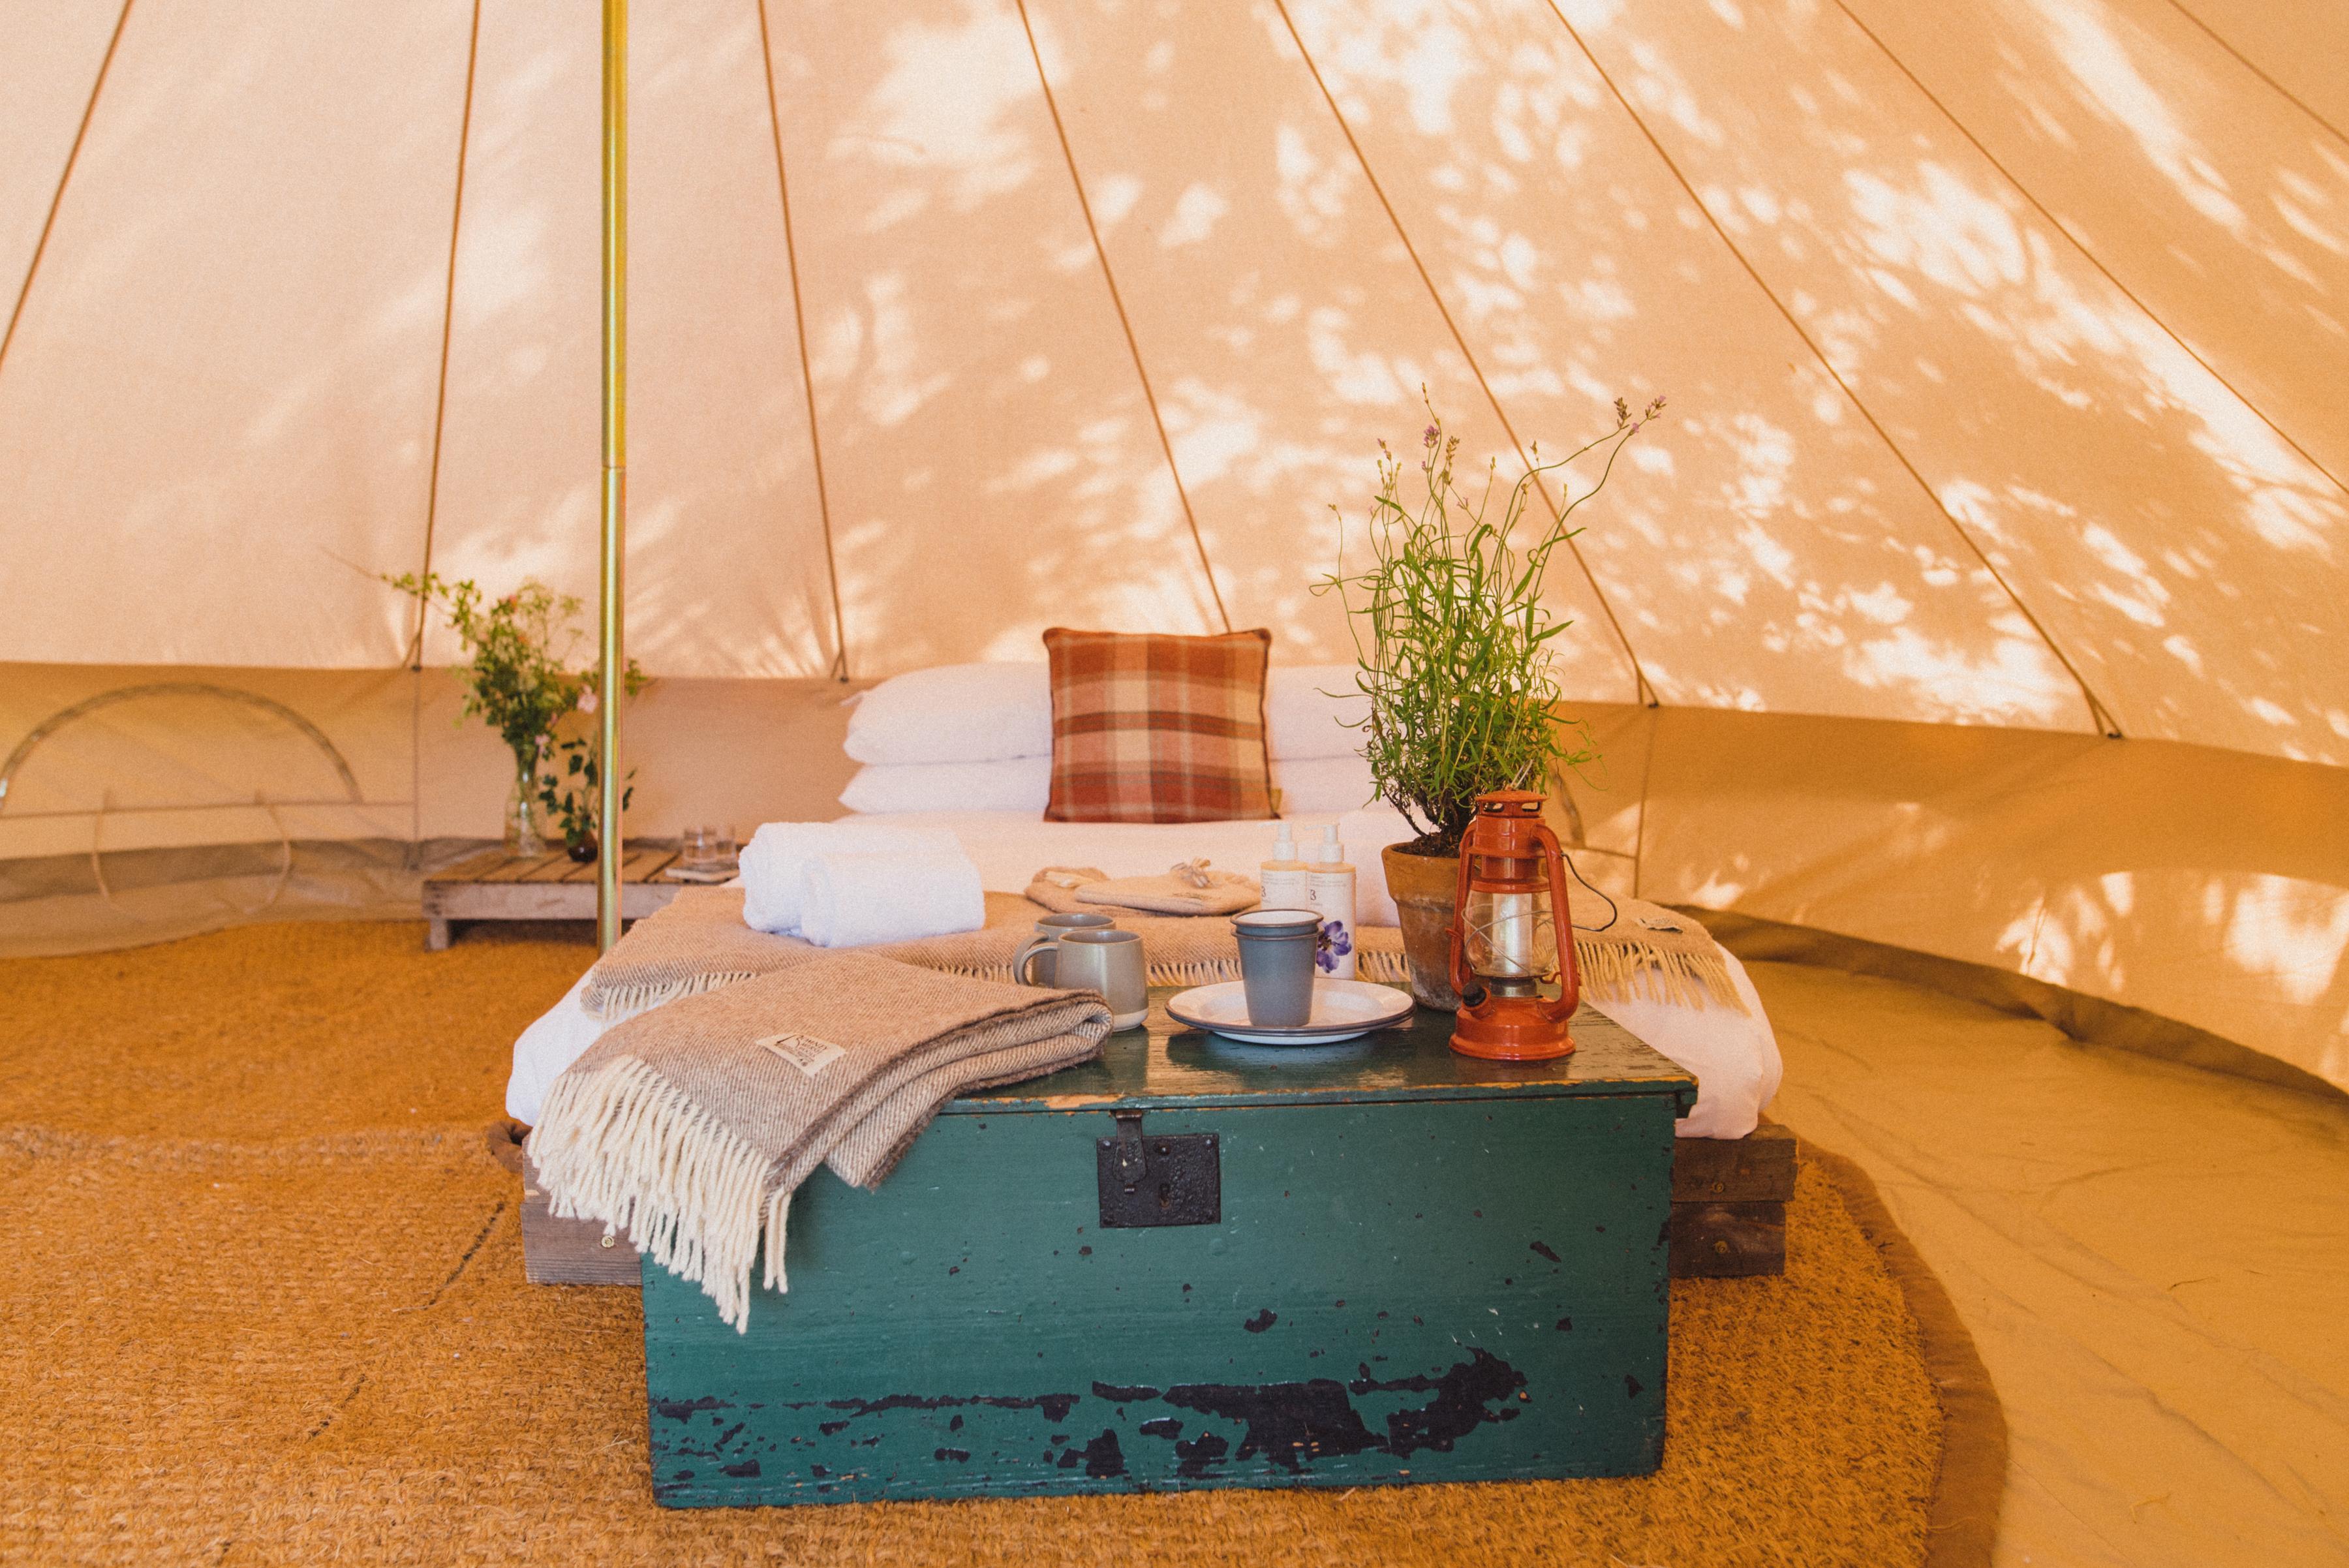 glamping bell tent